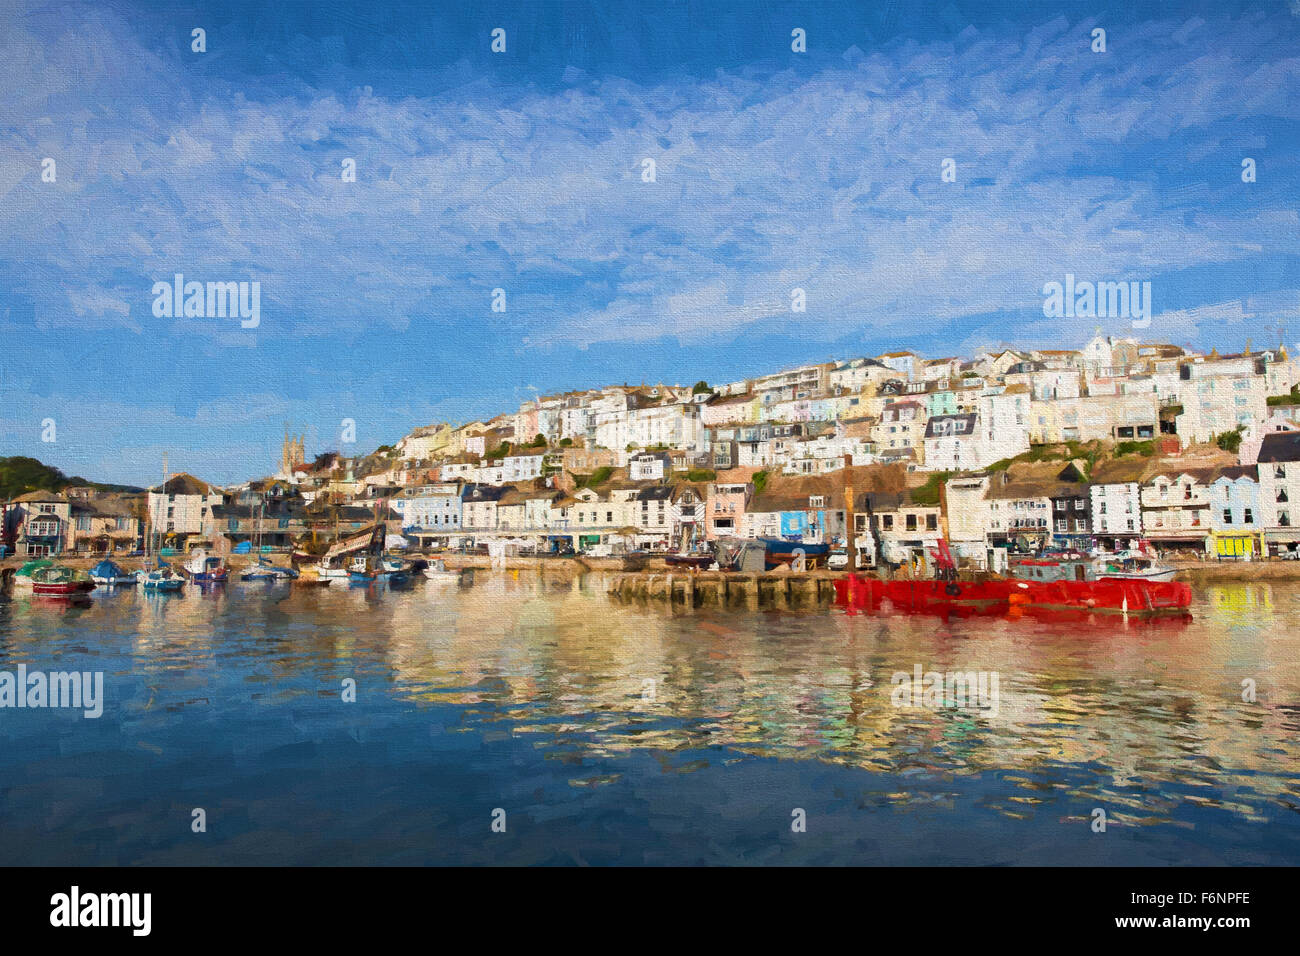 Brixham harbour Devon England with boats on a calm day with blue sky illustration like oil painting Stock Photo